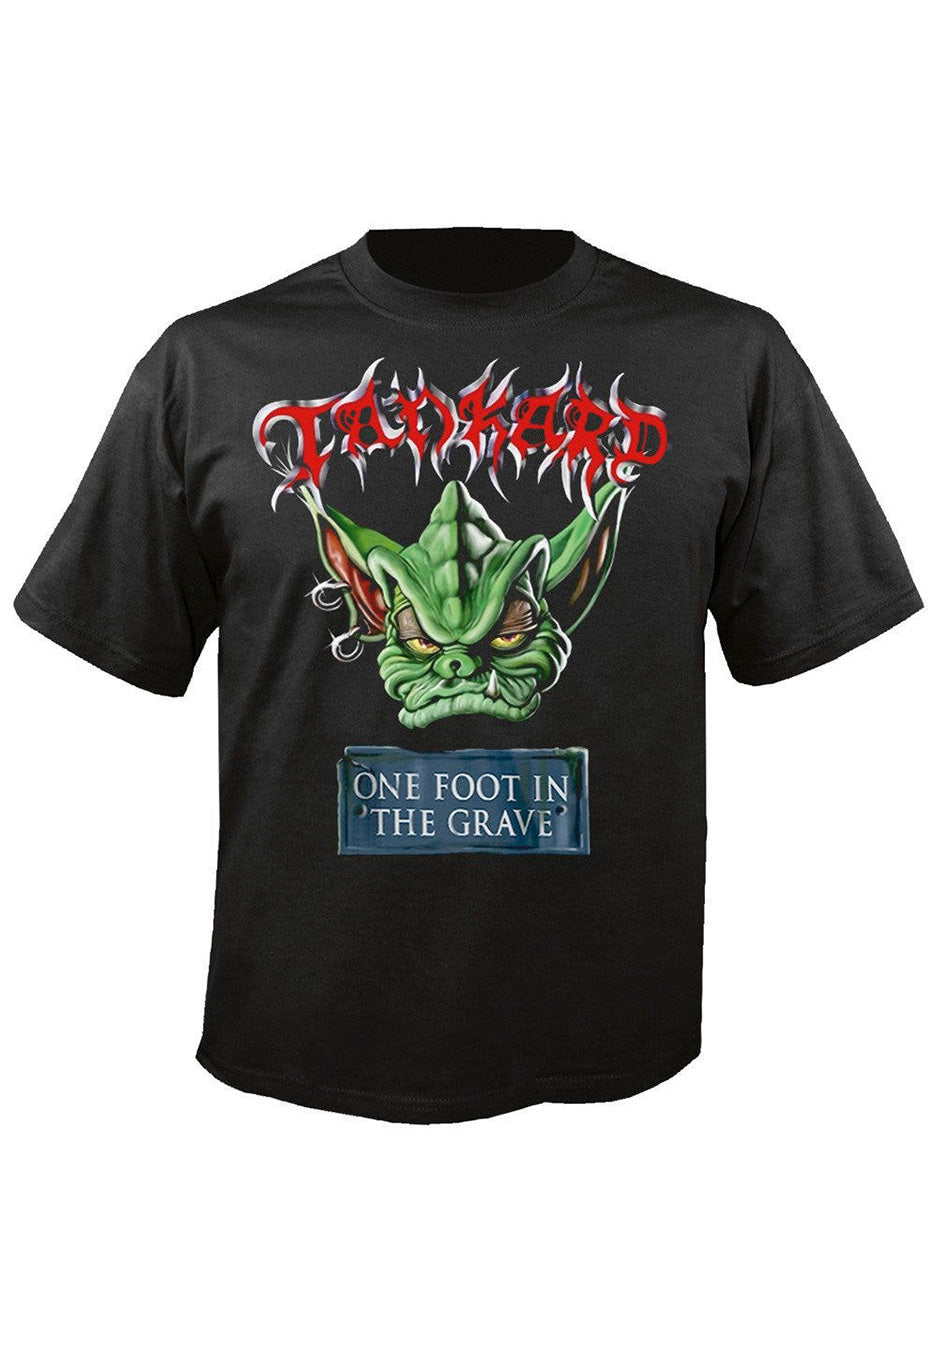 Tankard - One Foot In The Grave - T-Shirt